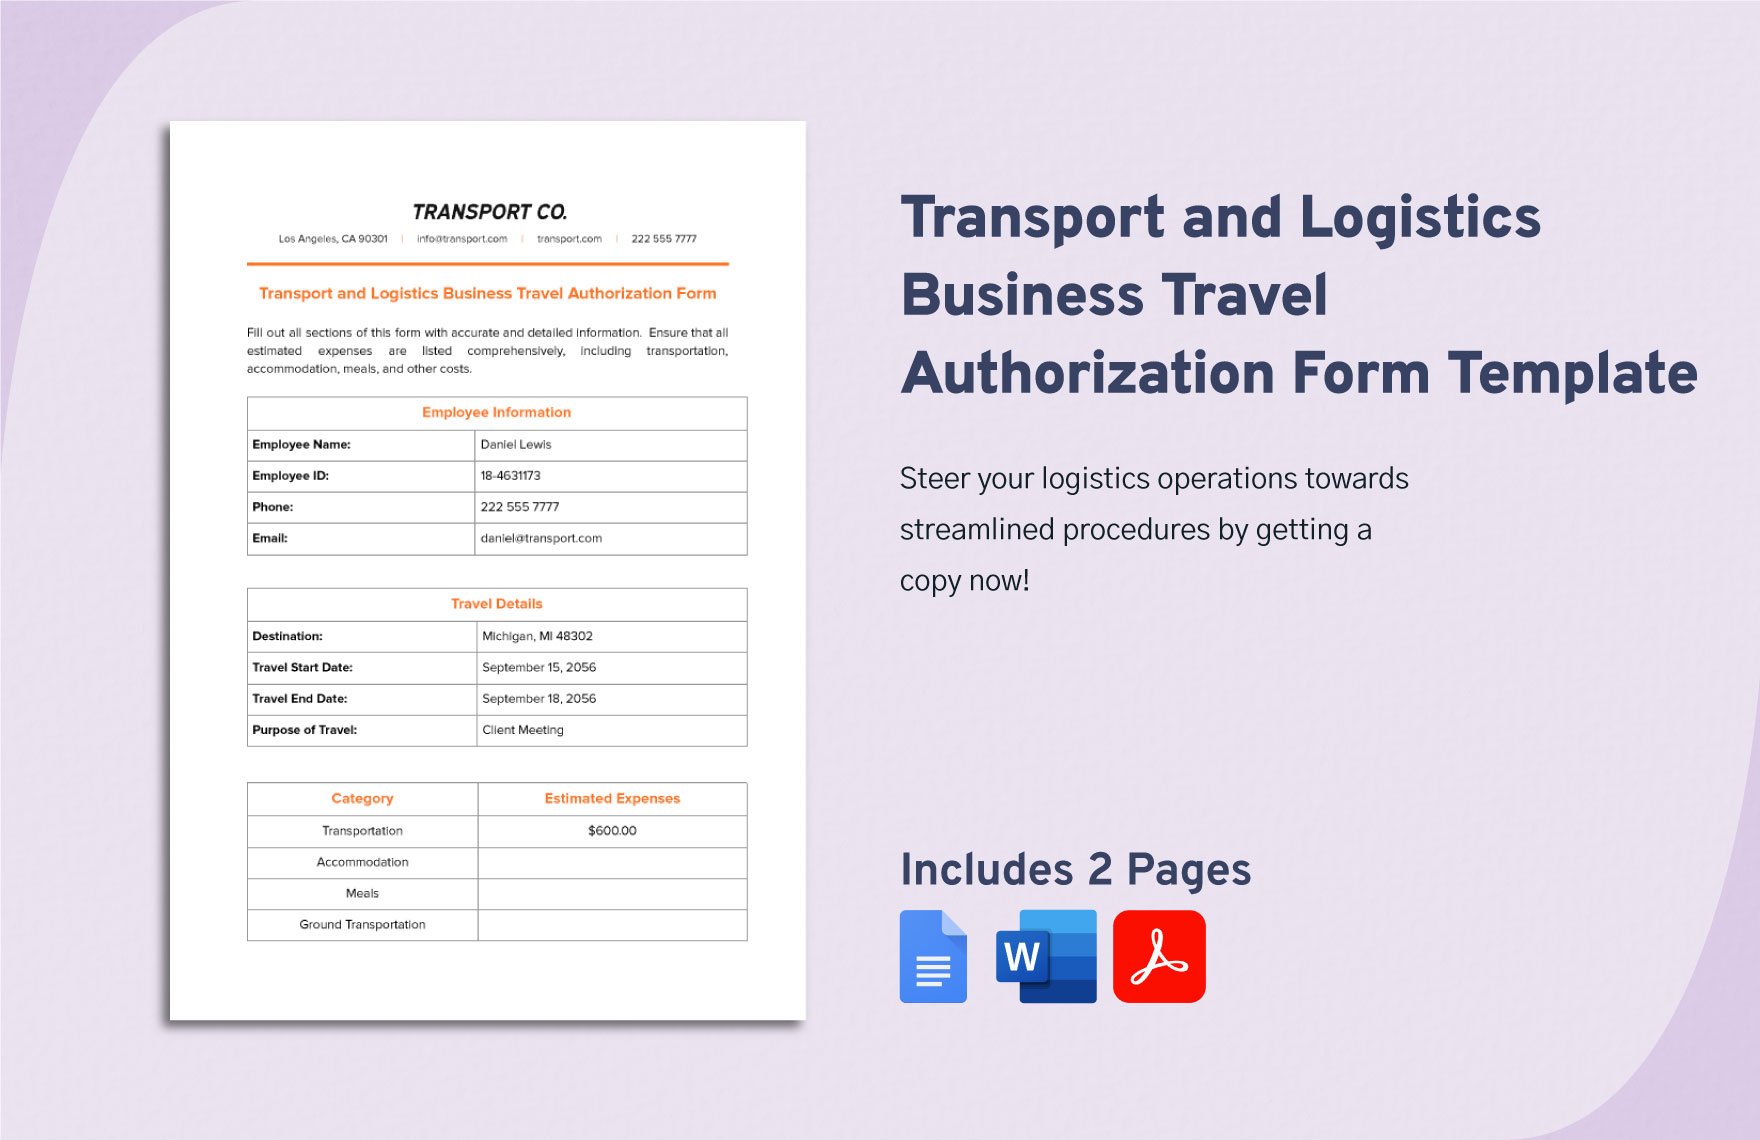 Transport and Logistics Business Travel Authorization Form Template